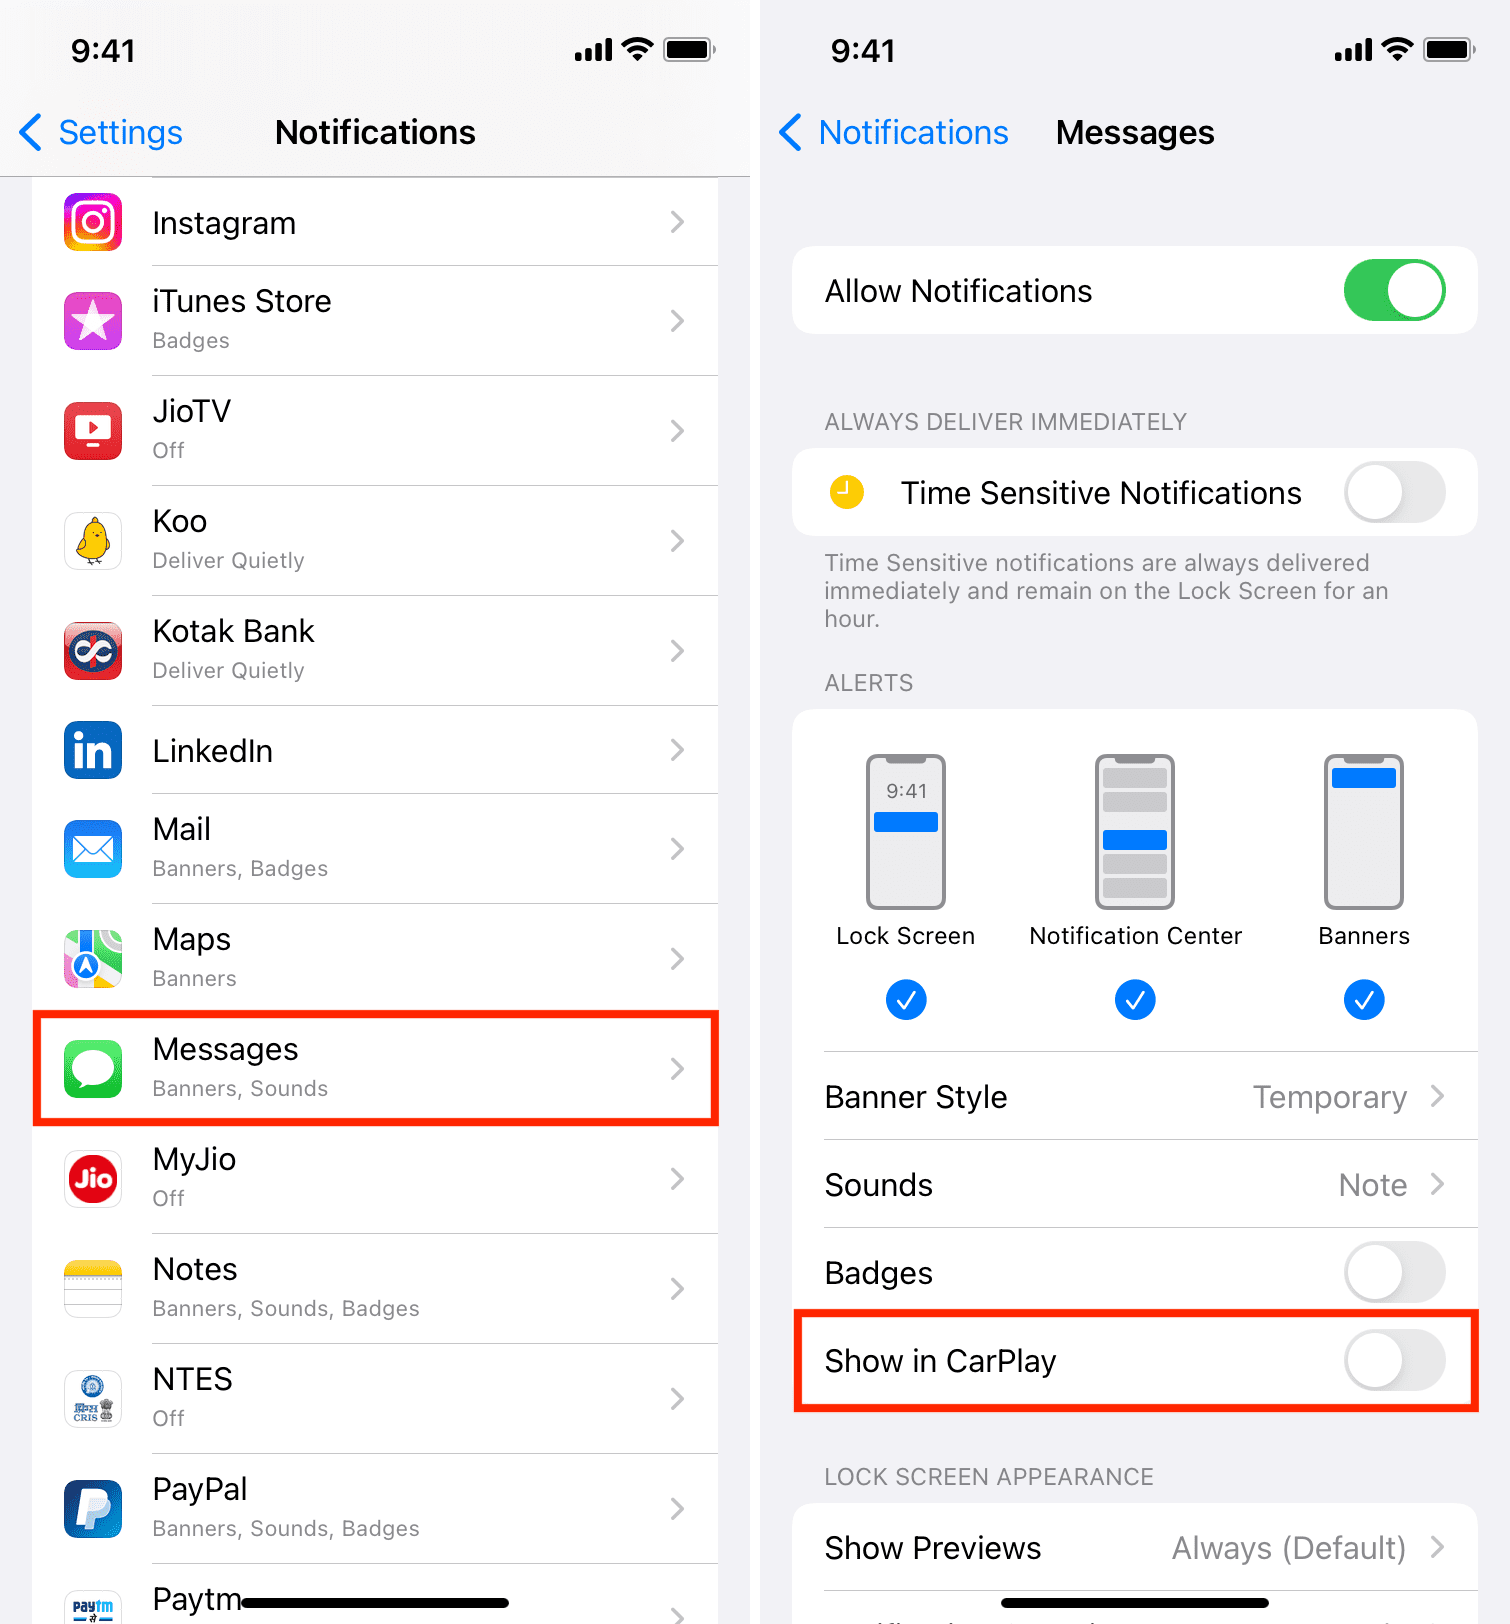 Turn off Show in CarPlay for Messages in iPhone notification settings